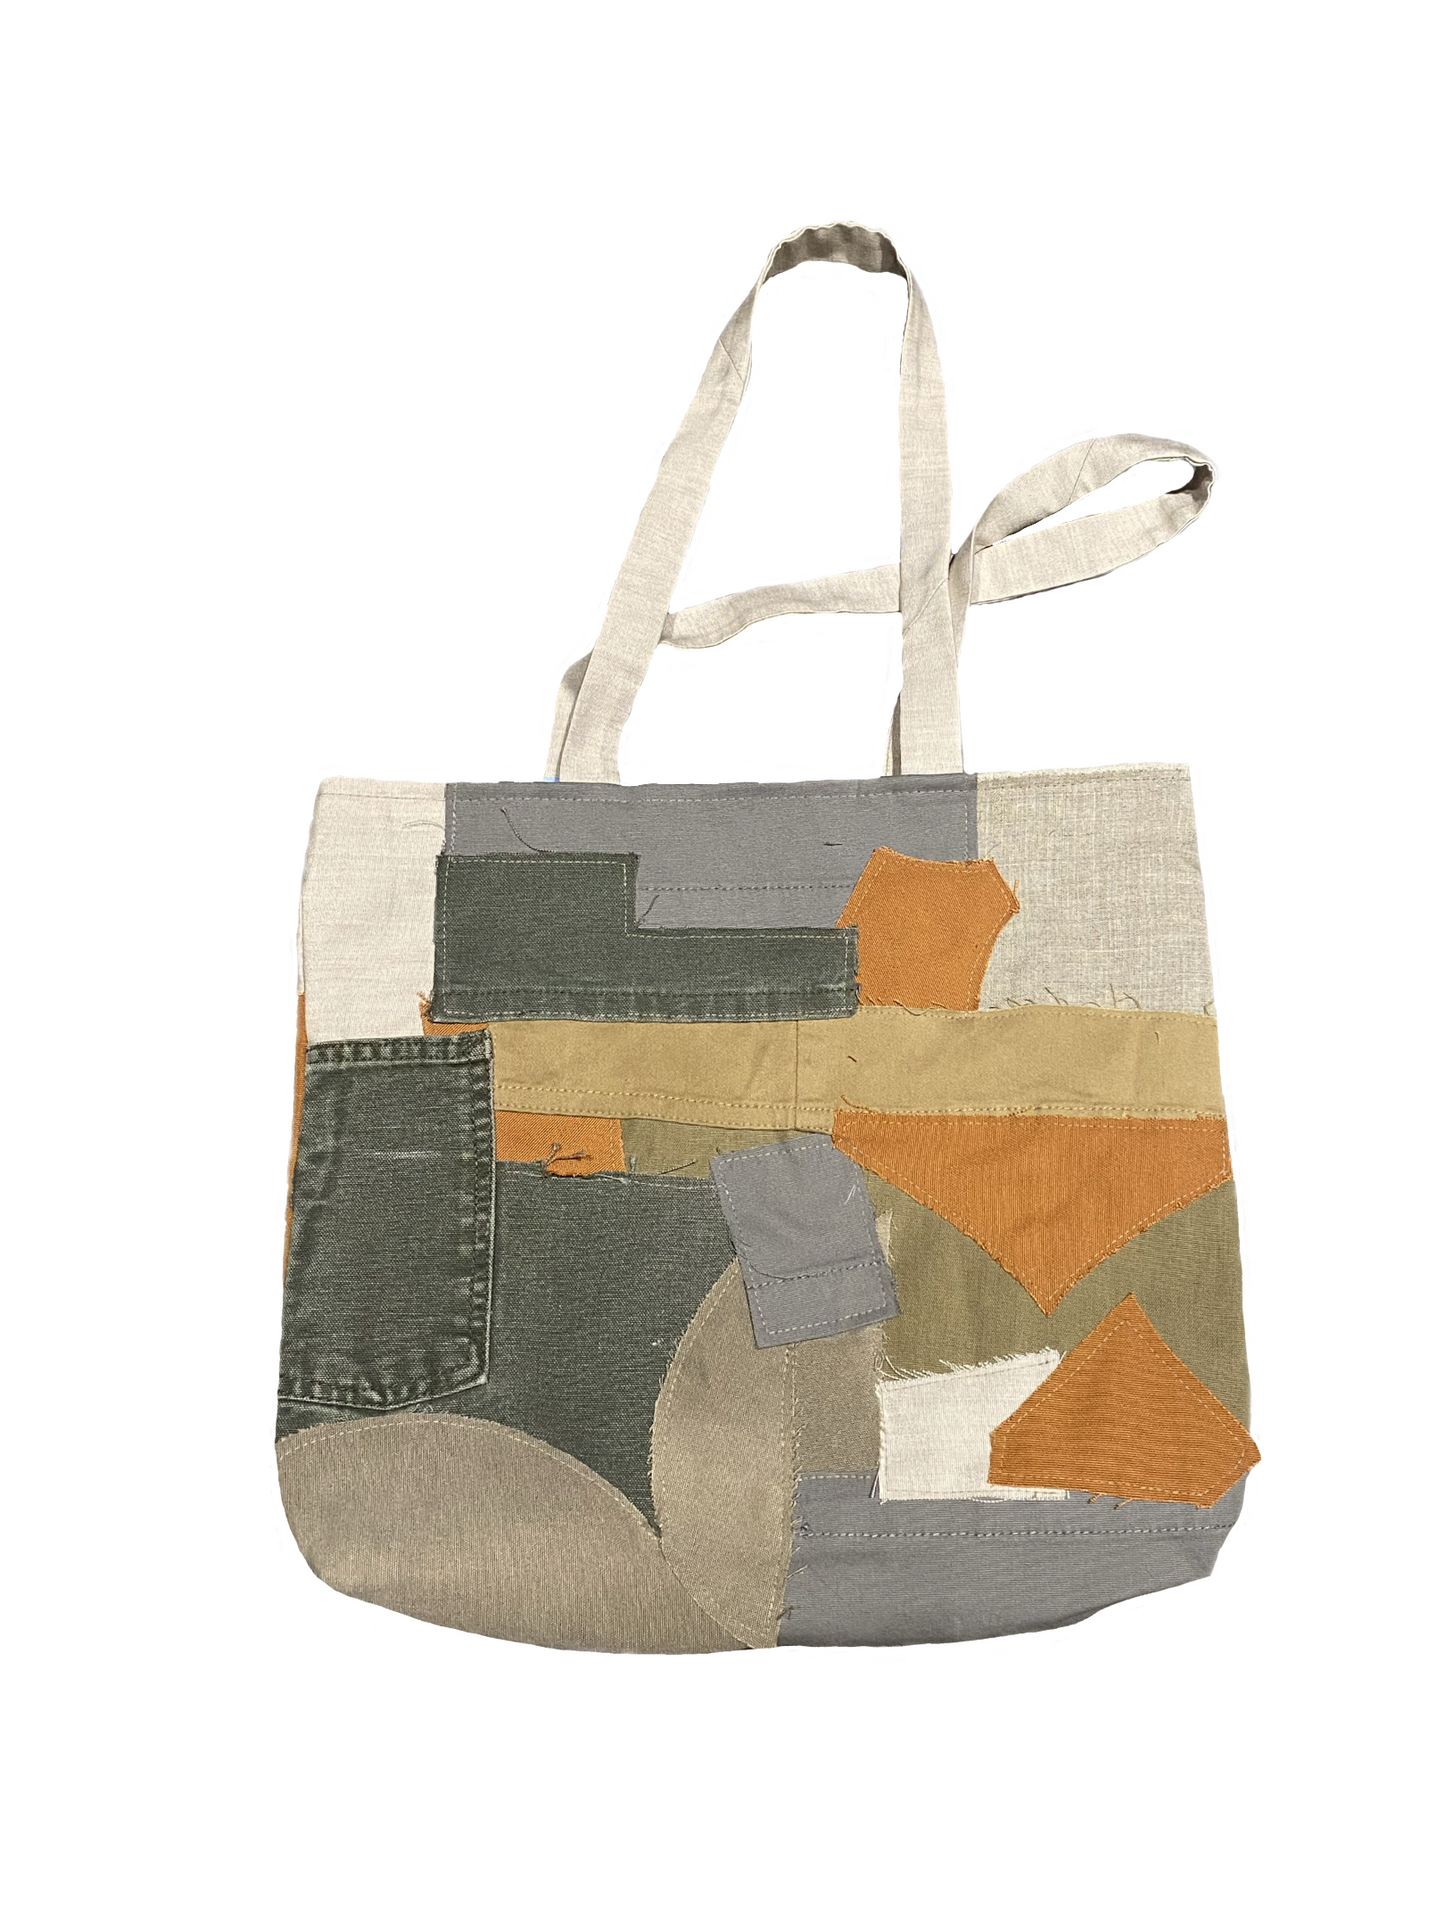 Patchwork Jean Tote